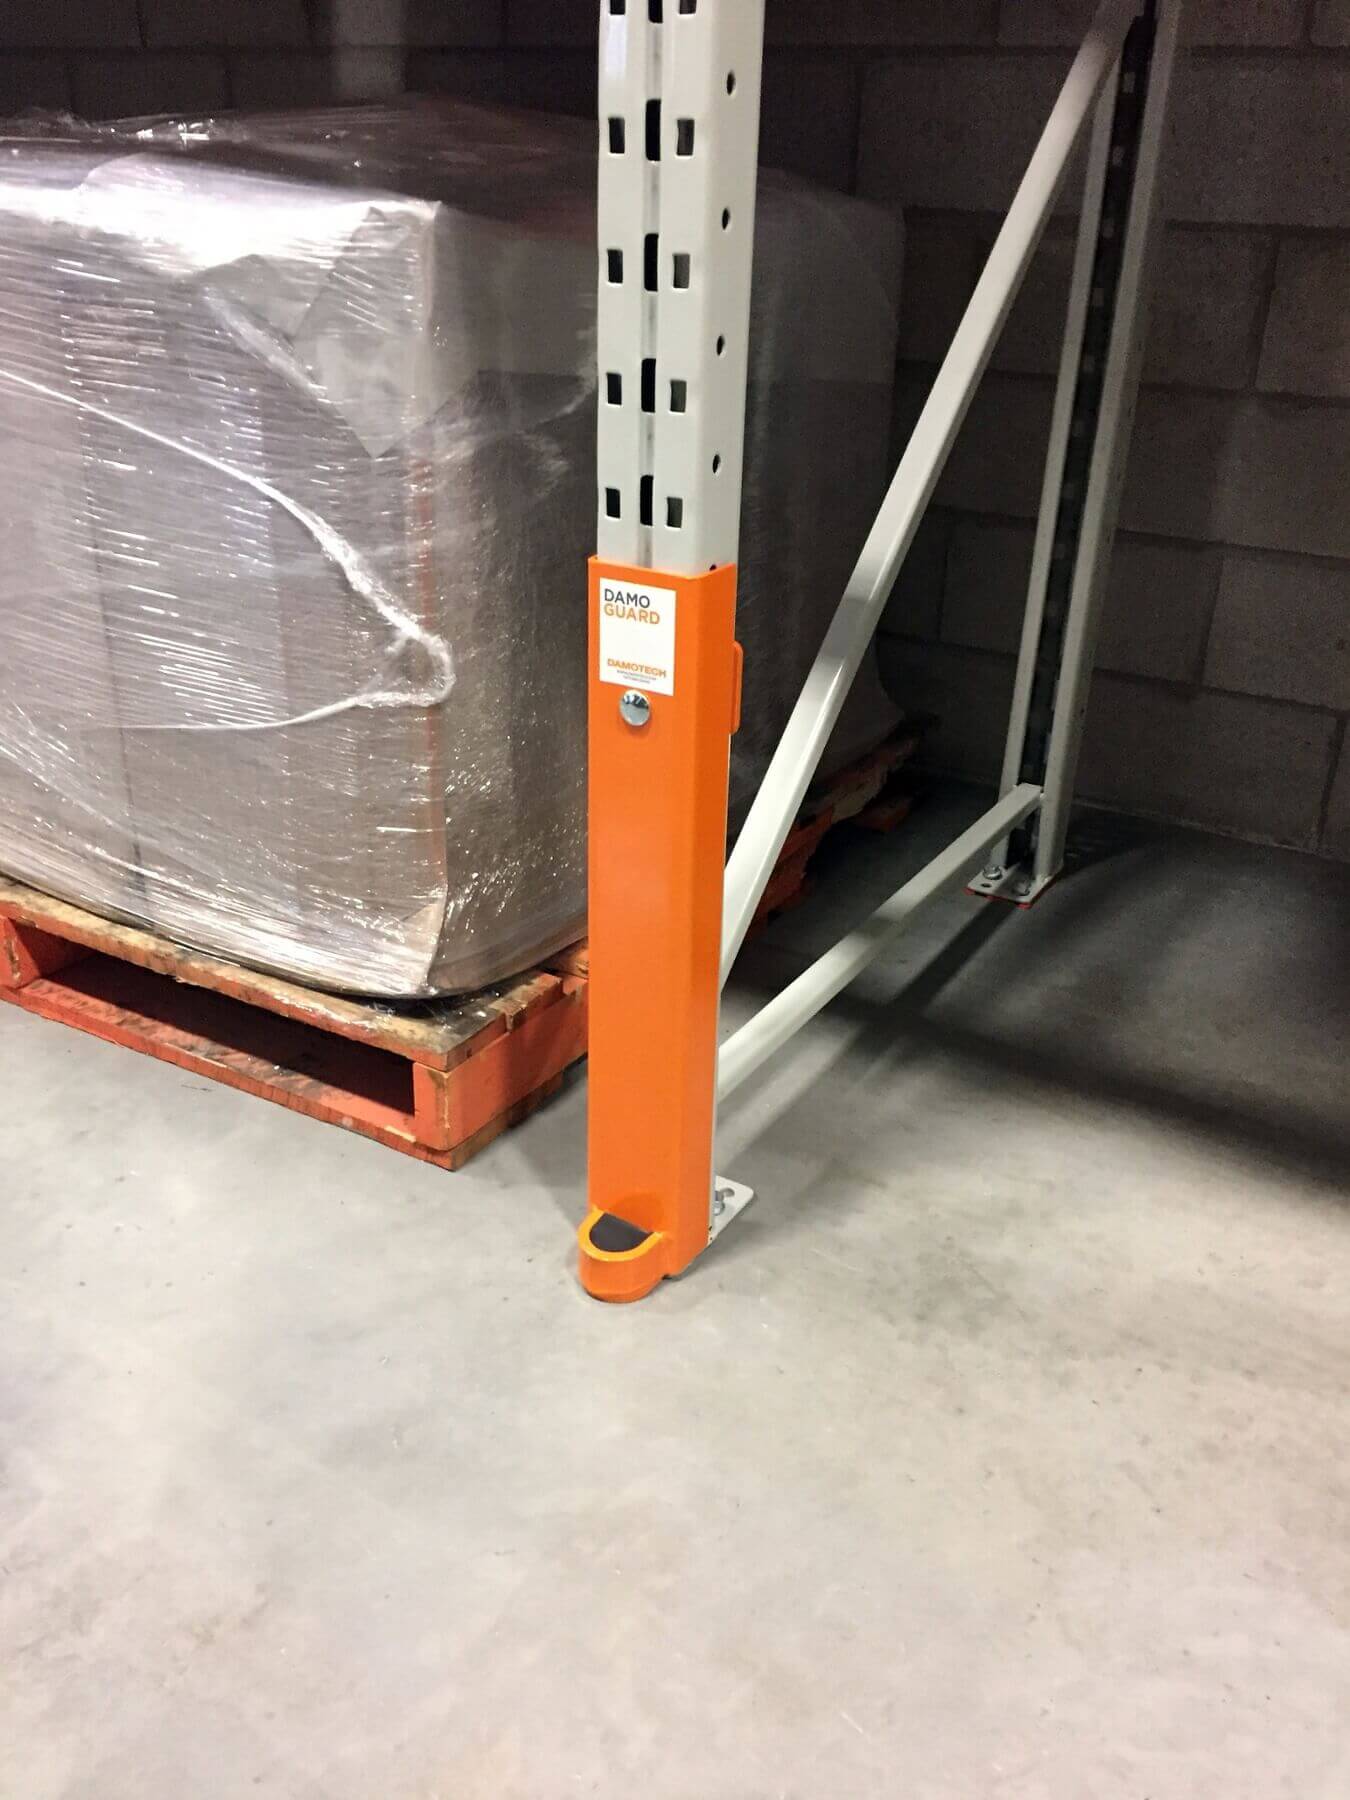 Damo Guard Installed and protecting a pallet rack upright